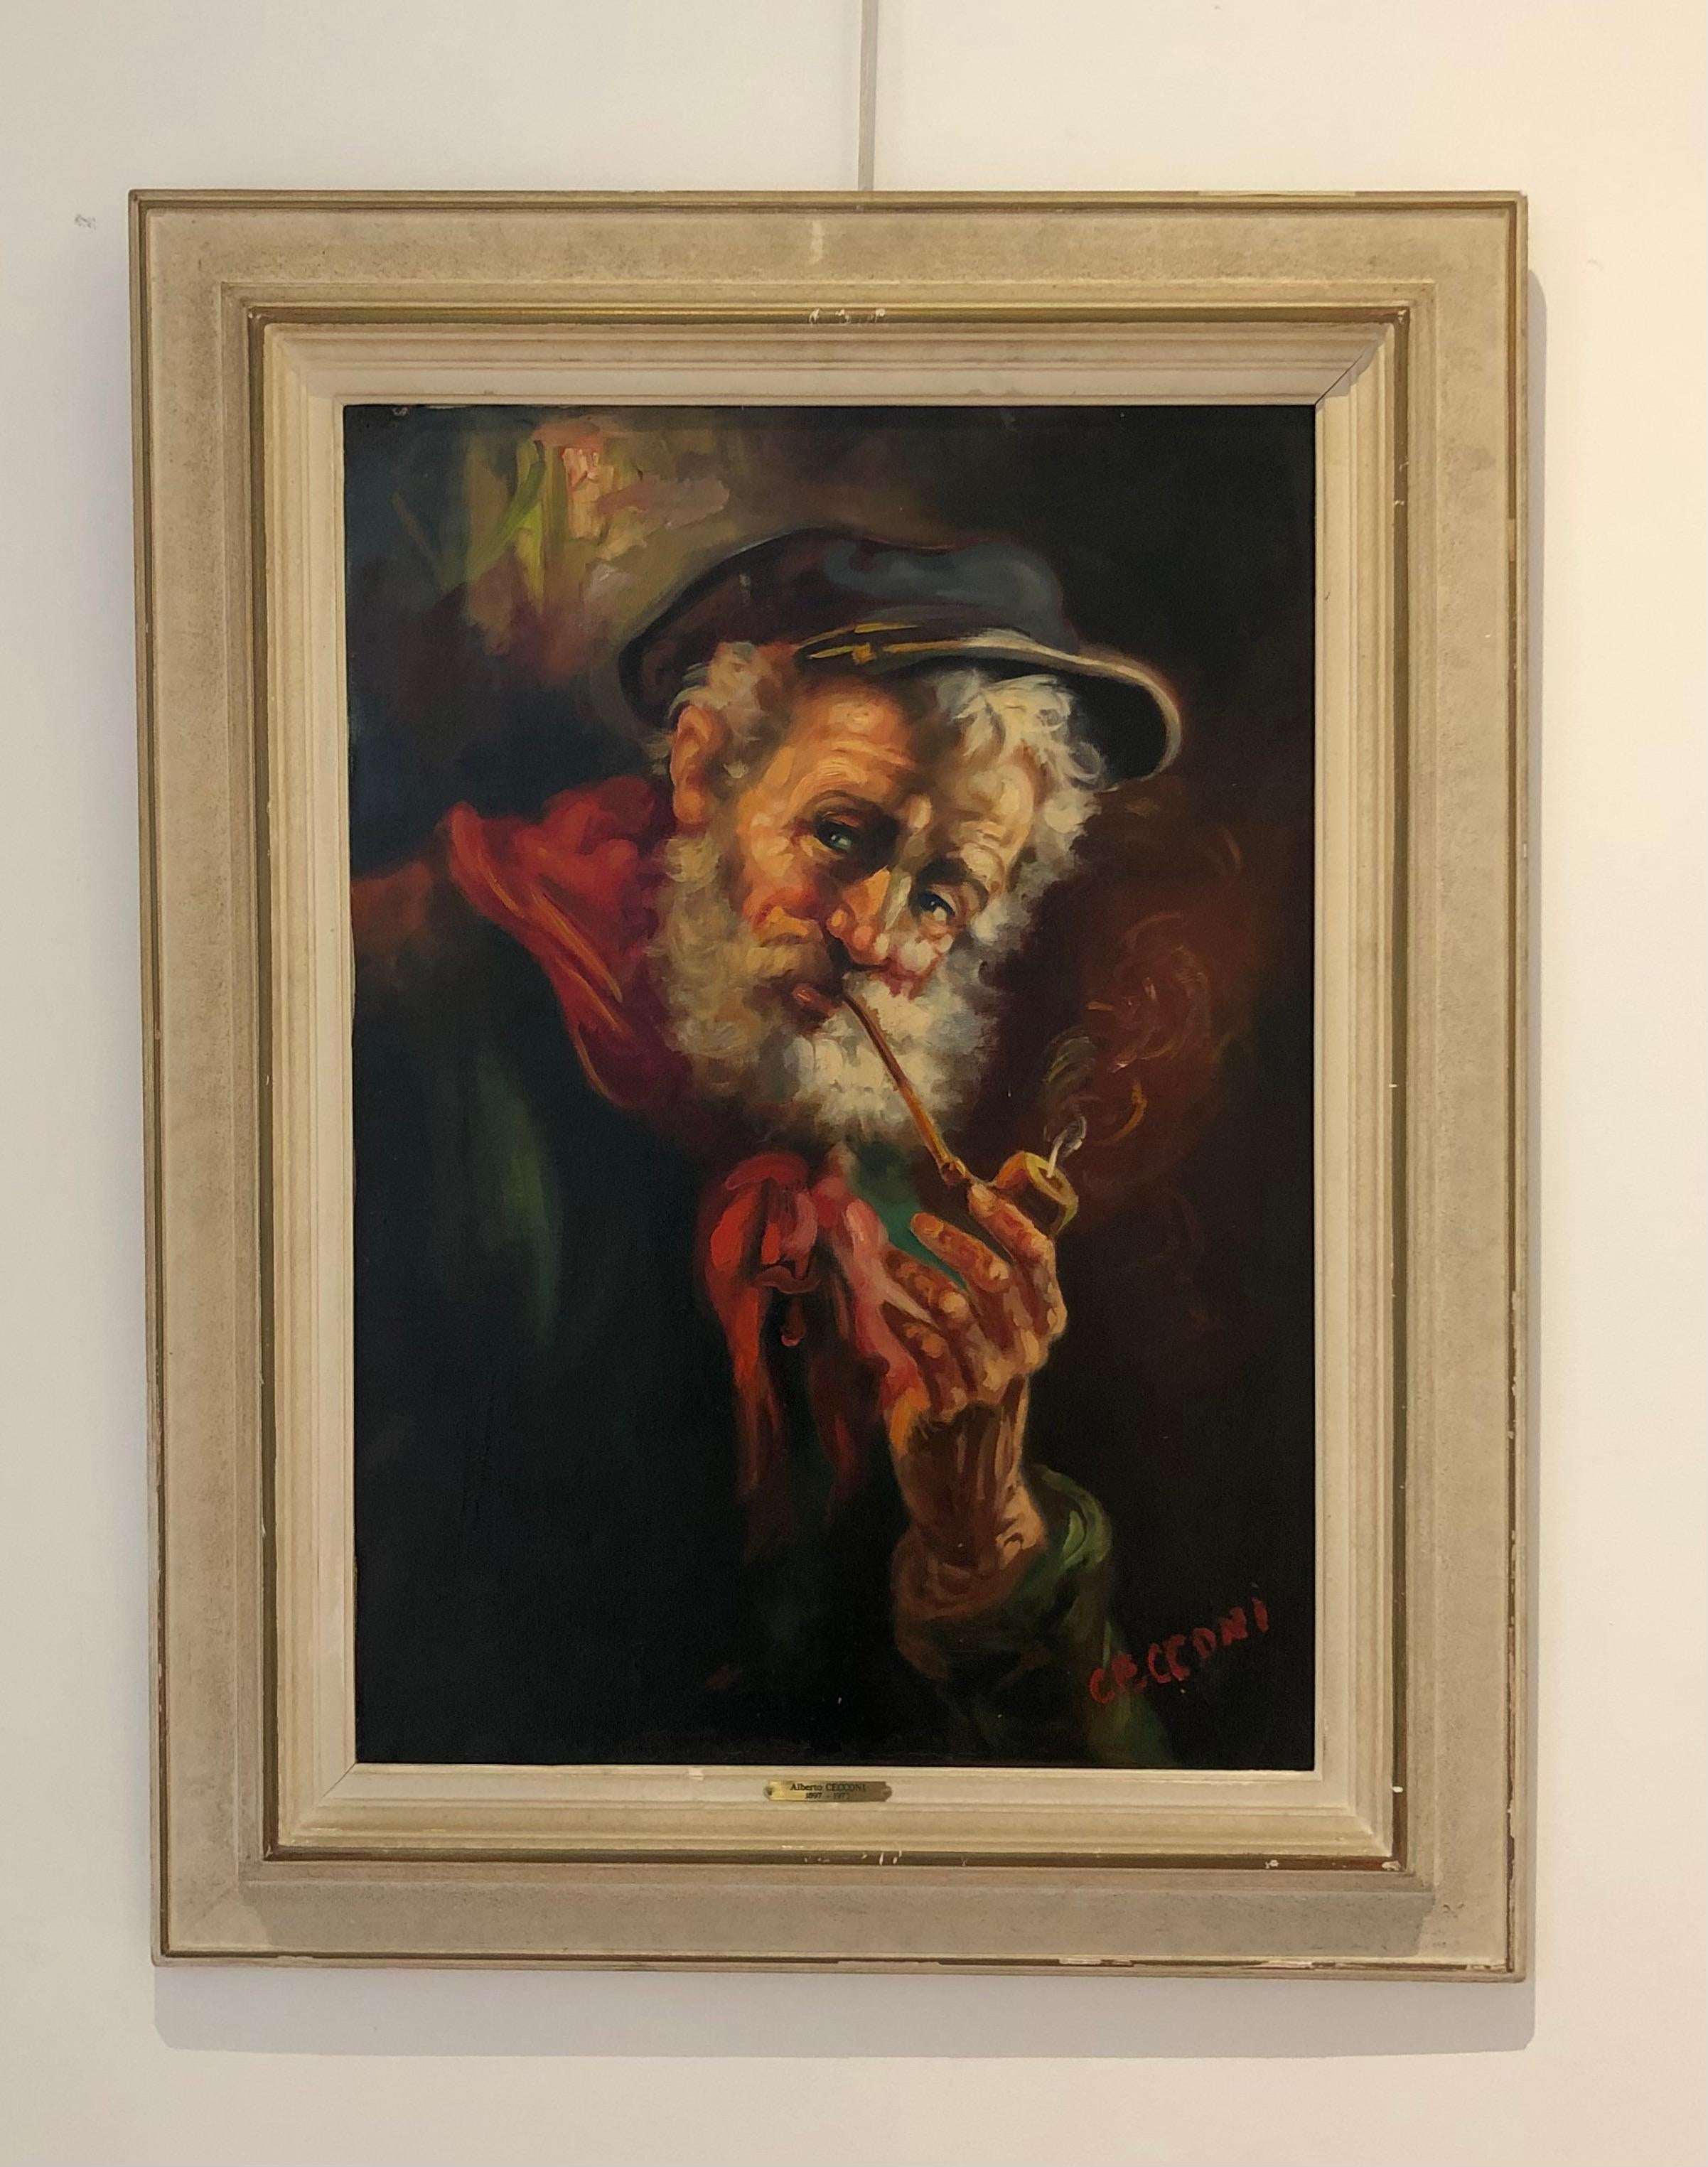 Old man with the pipe - Painting by Alberto Cecconi